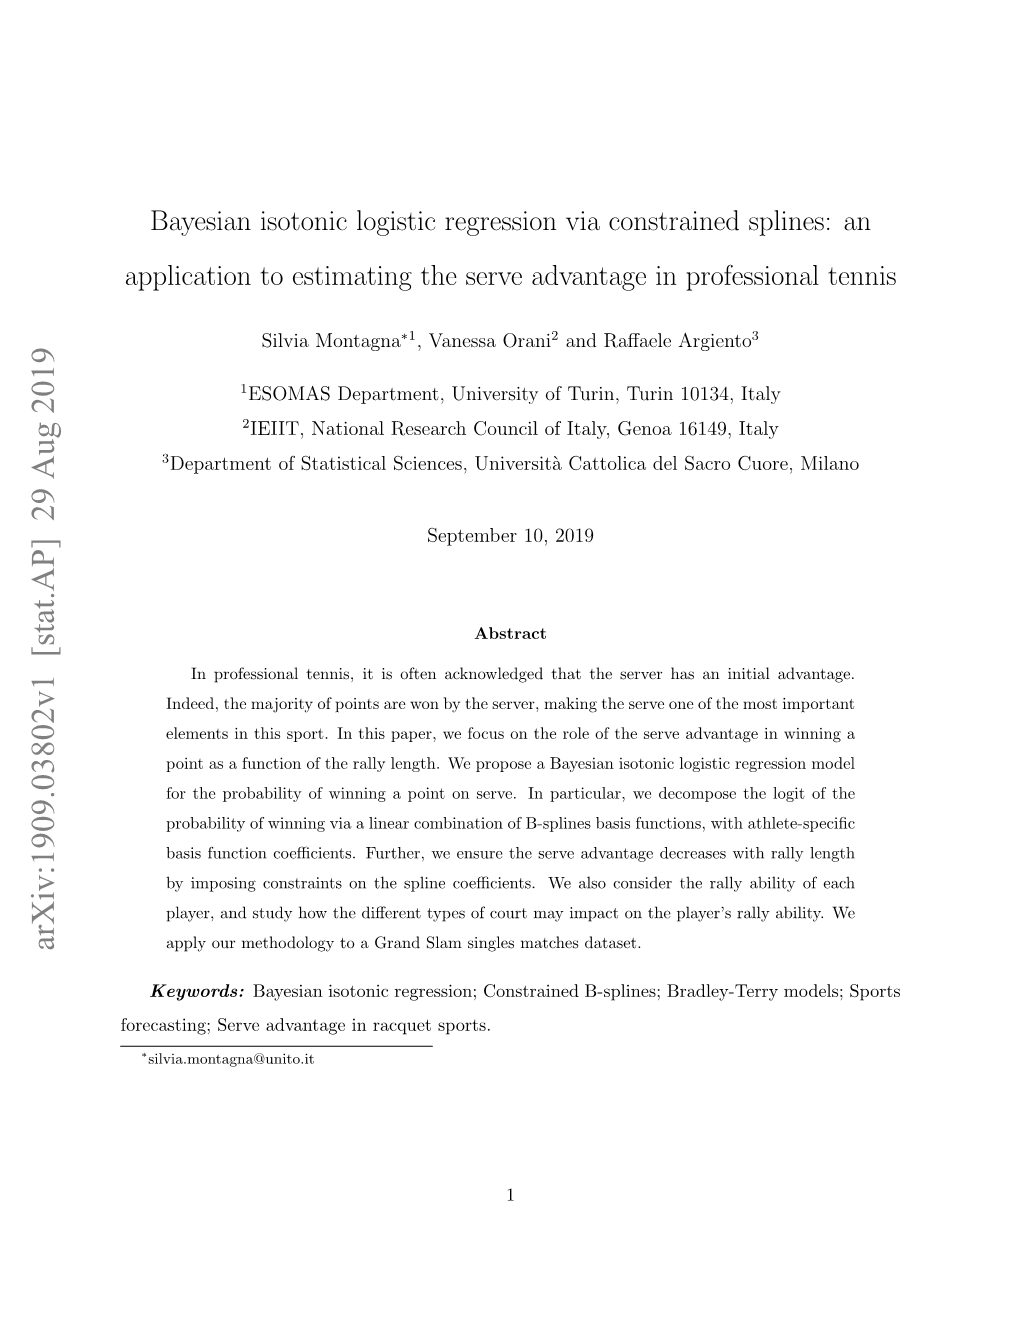 Bayesian Isotonic Logistic Regression Via Constrained Splines: an Application to Estimating the Serve Advantage in Professional Tennis